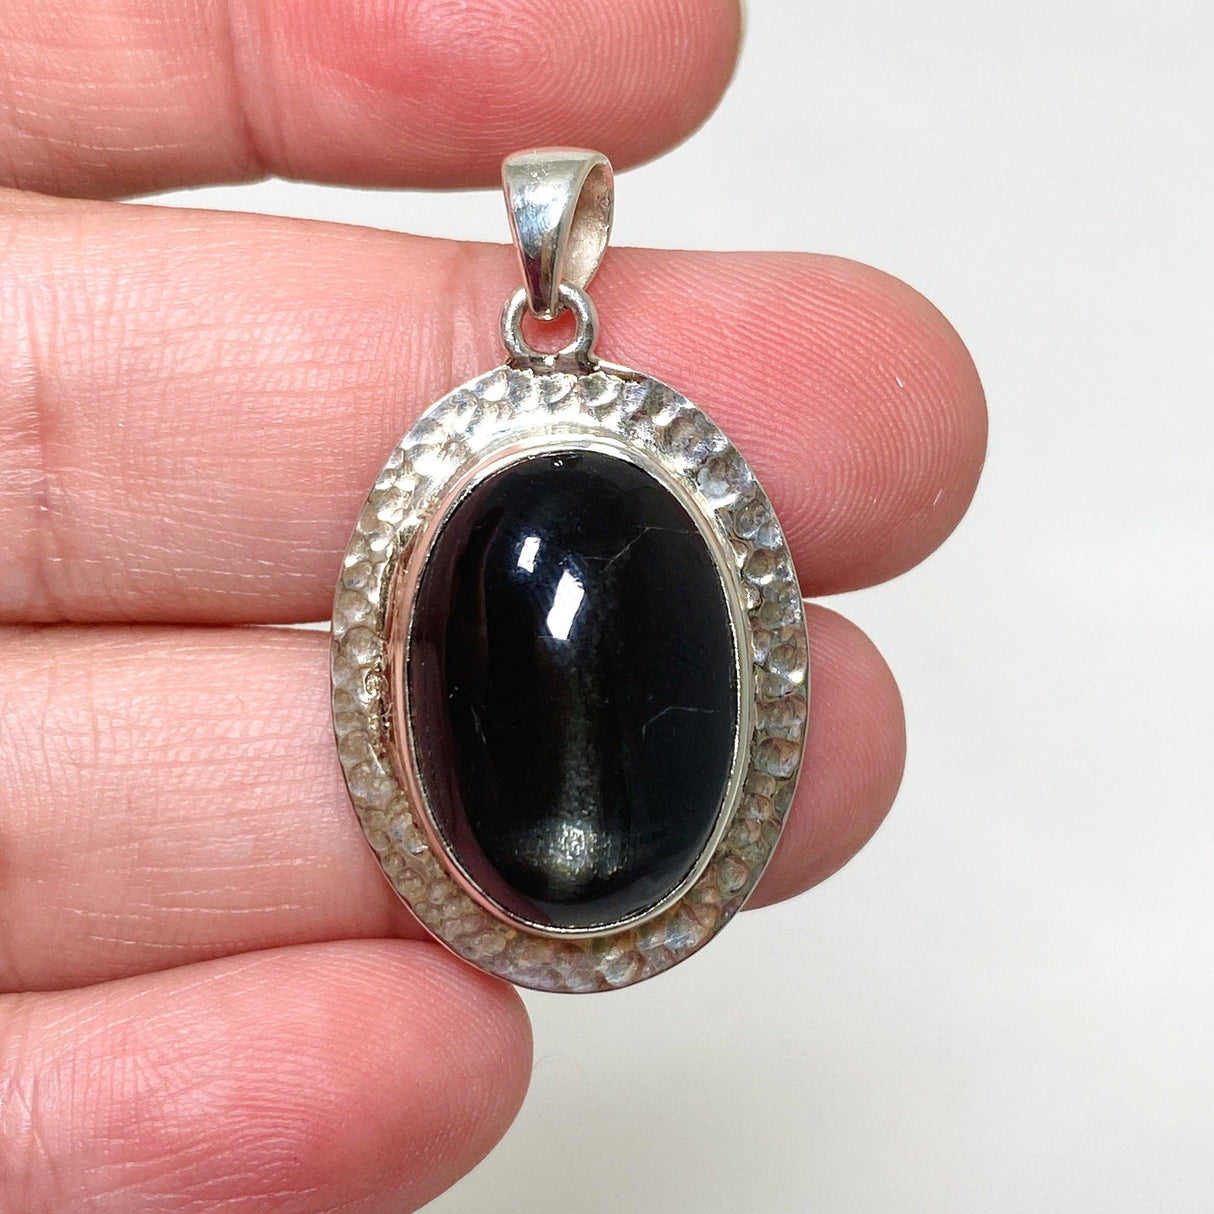 Black Star Diopside Oval Pendant in a Hammered Setting KPGJ4476 - Nature's Magick